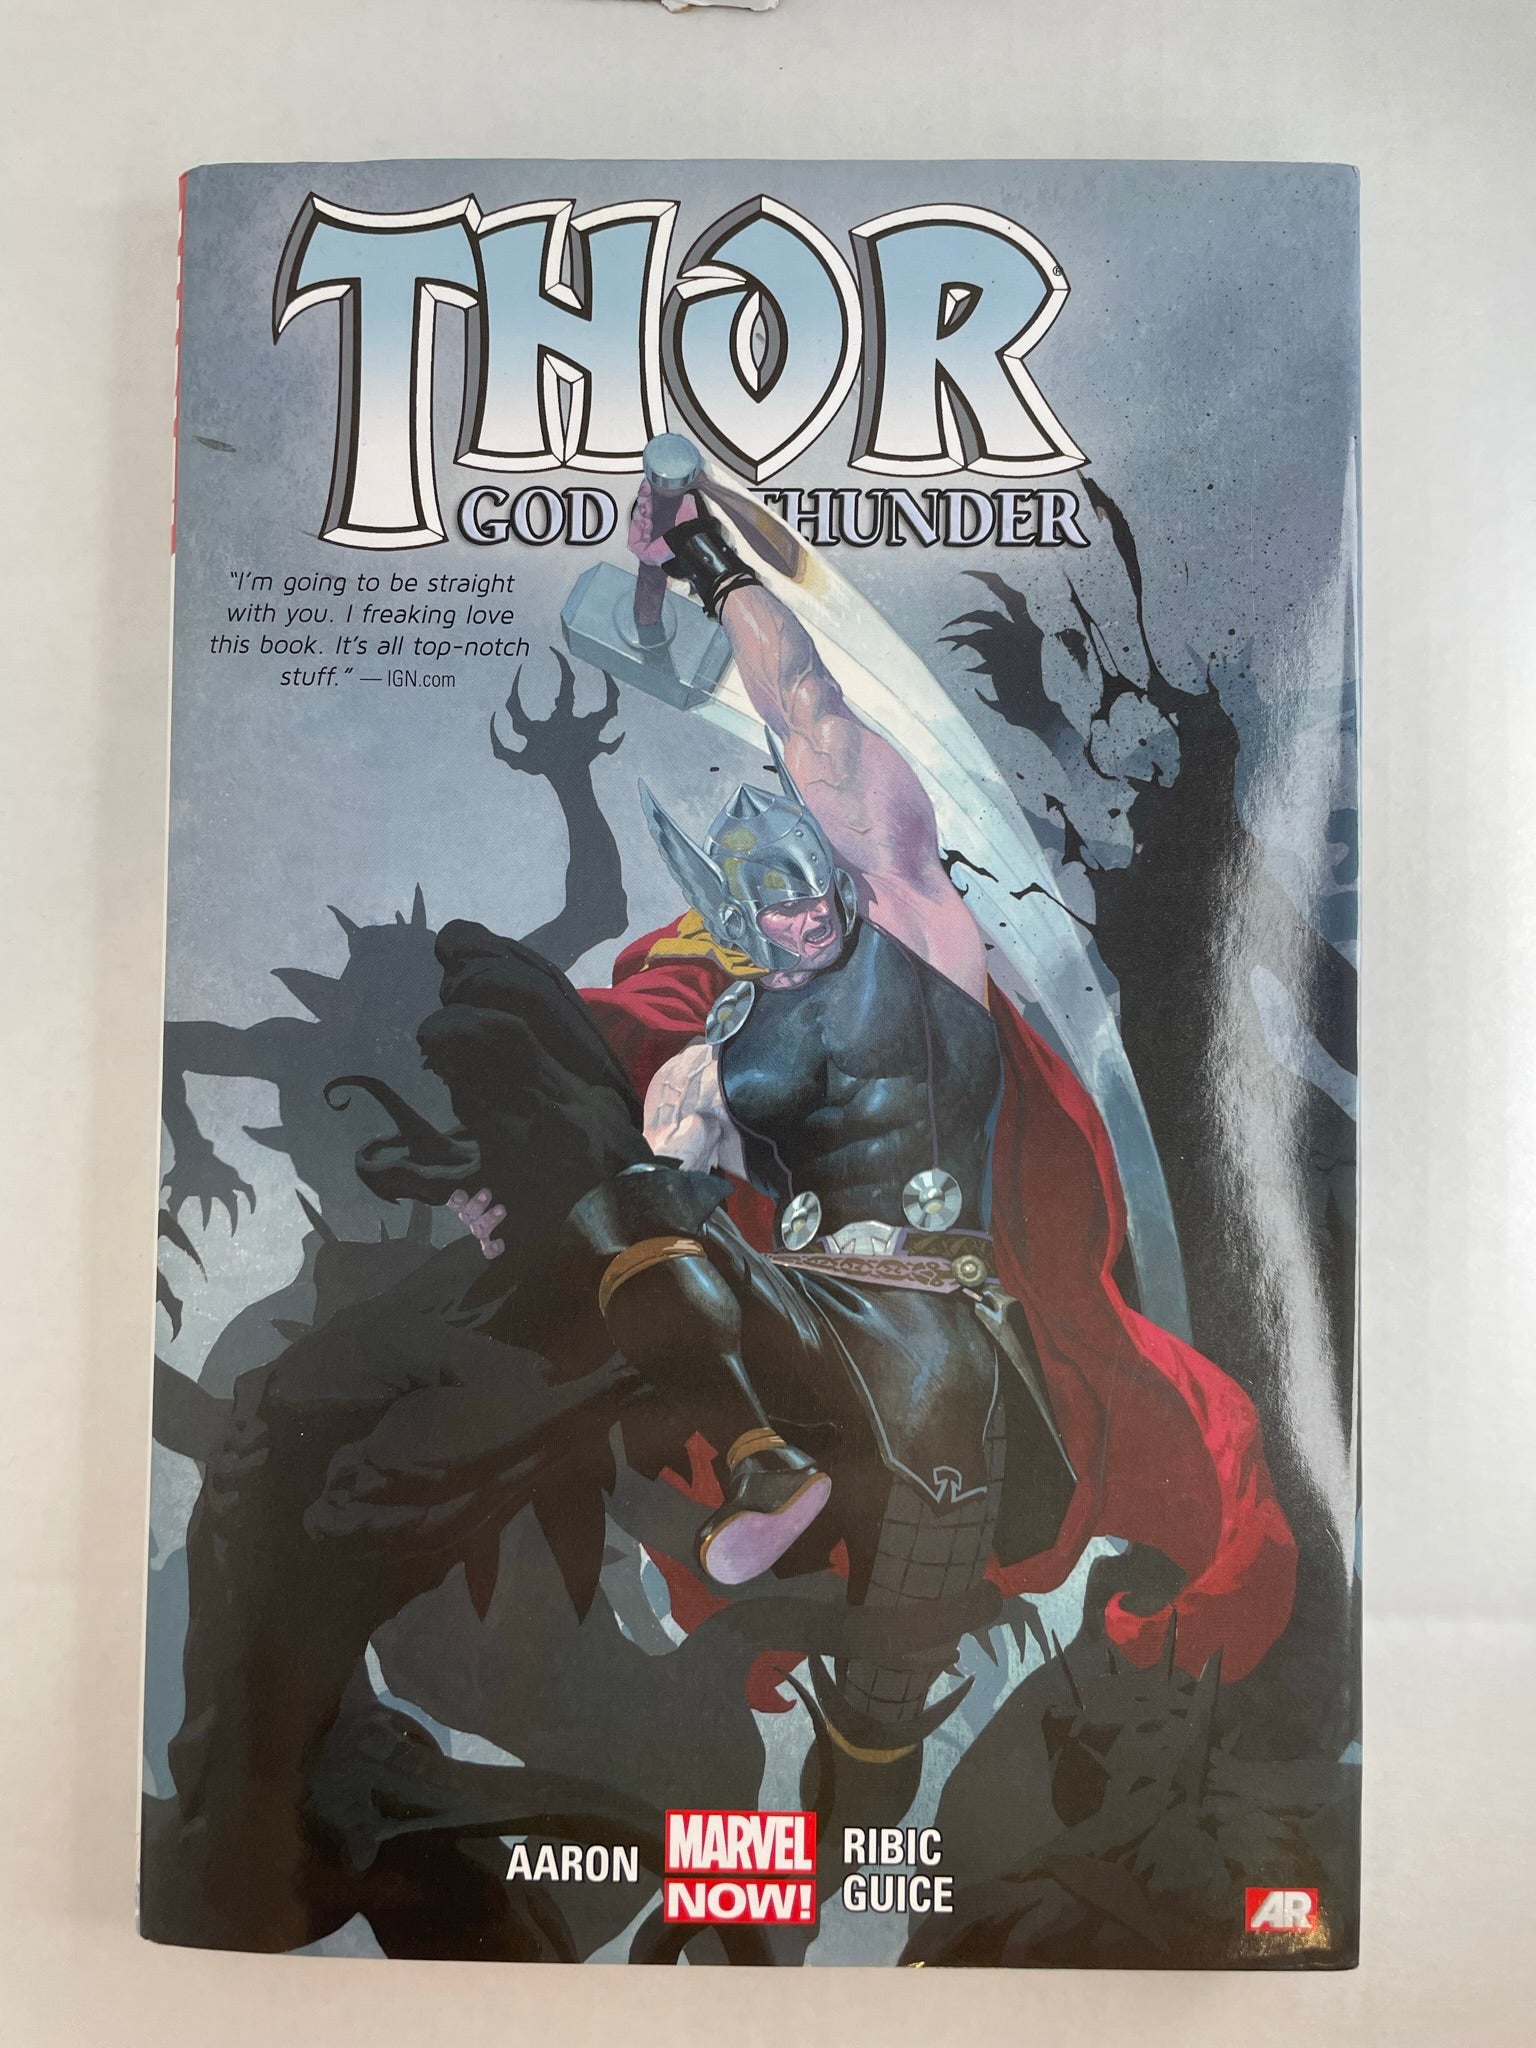 THOR: GOD OF THUNDER VOL. 1 DELUXE HARDCOVER - NEW OPENED STOCK